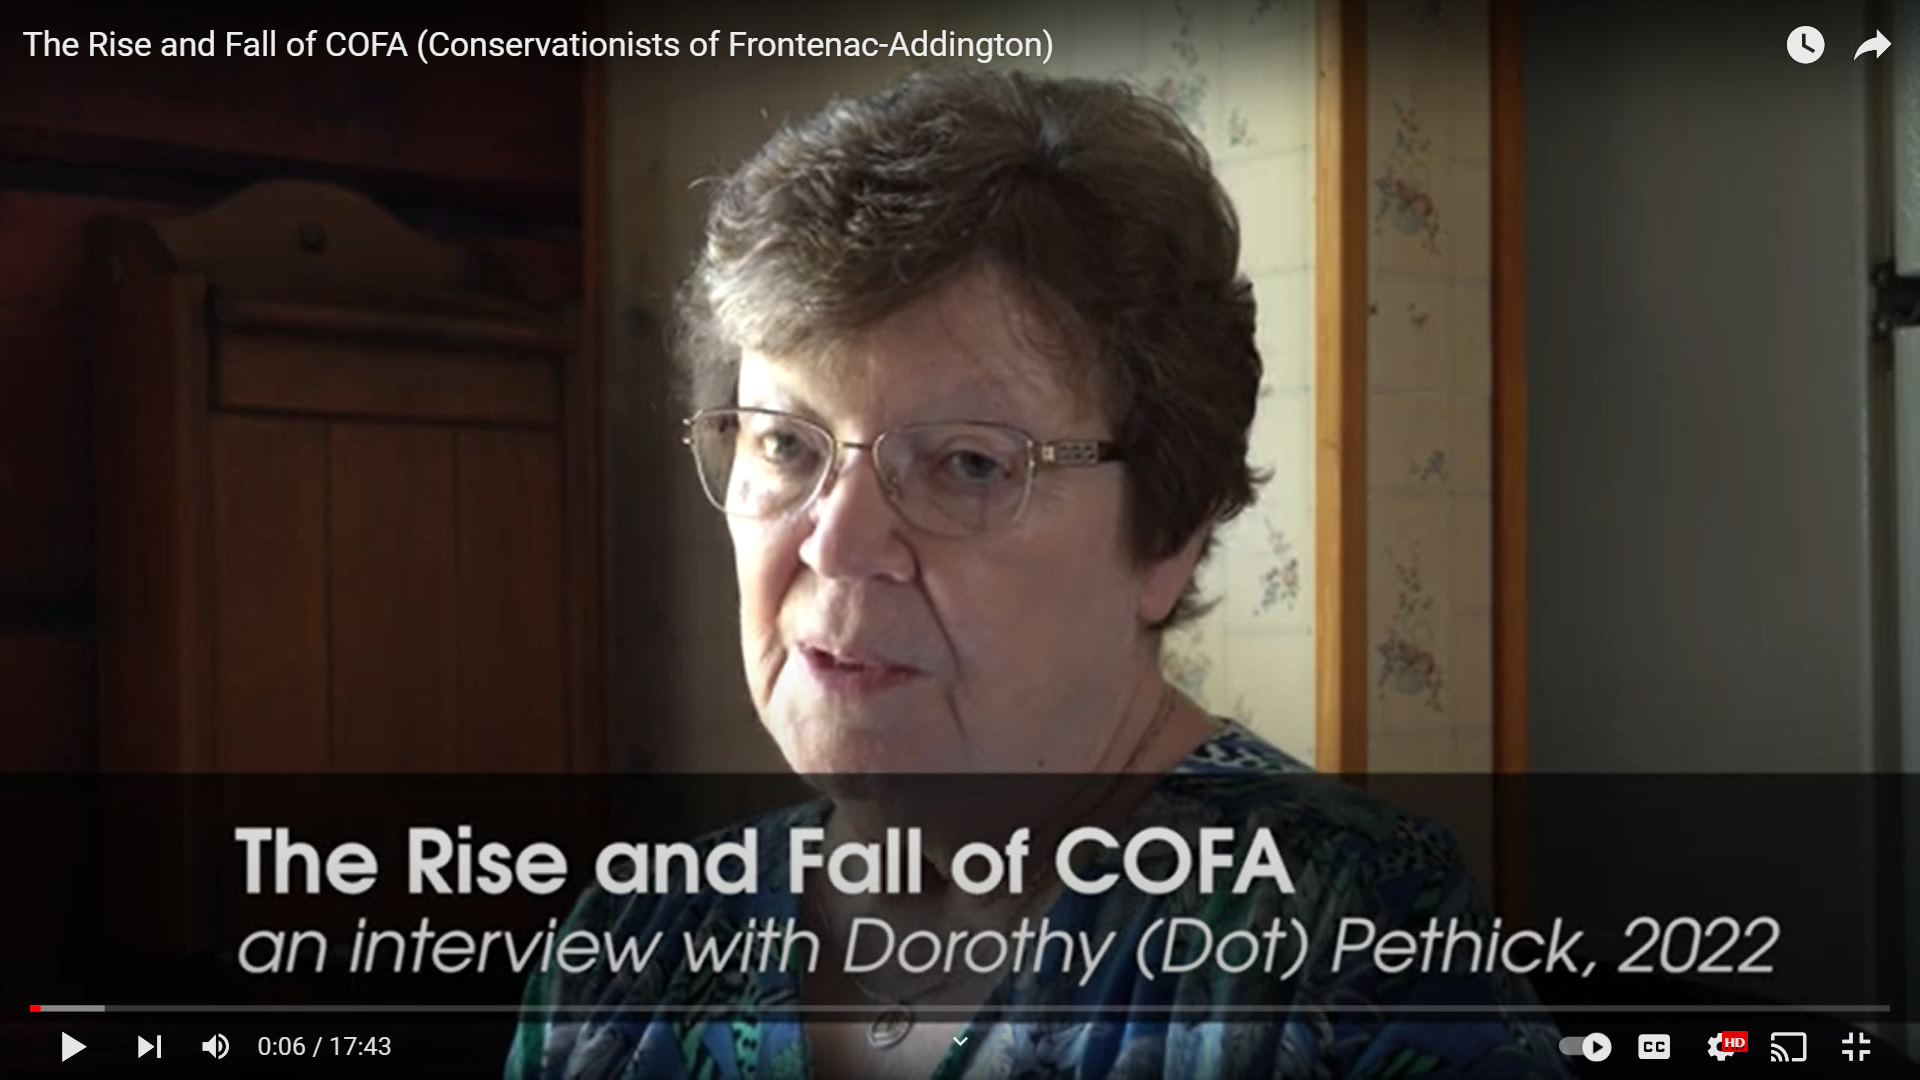 The Rise and Fall of COFA - Dorothy Pethick